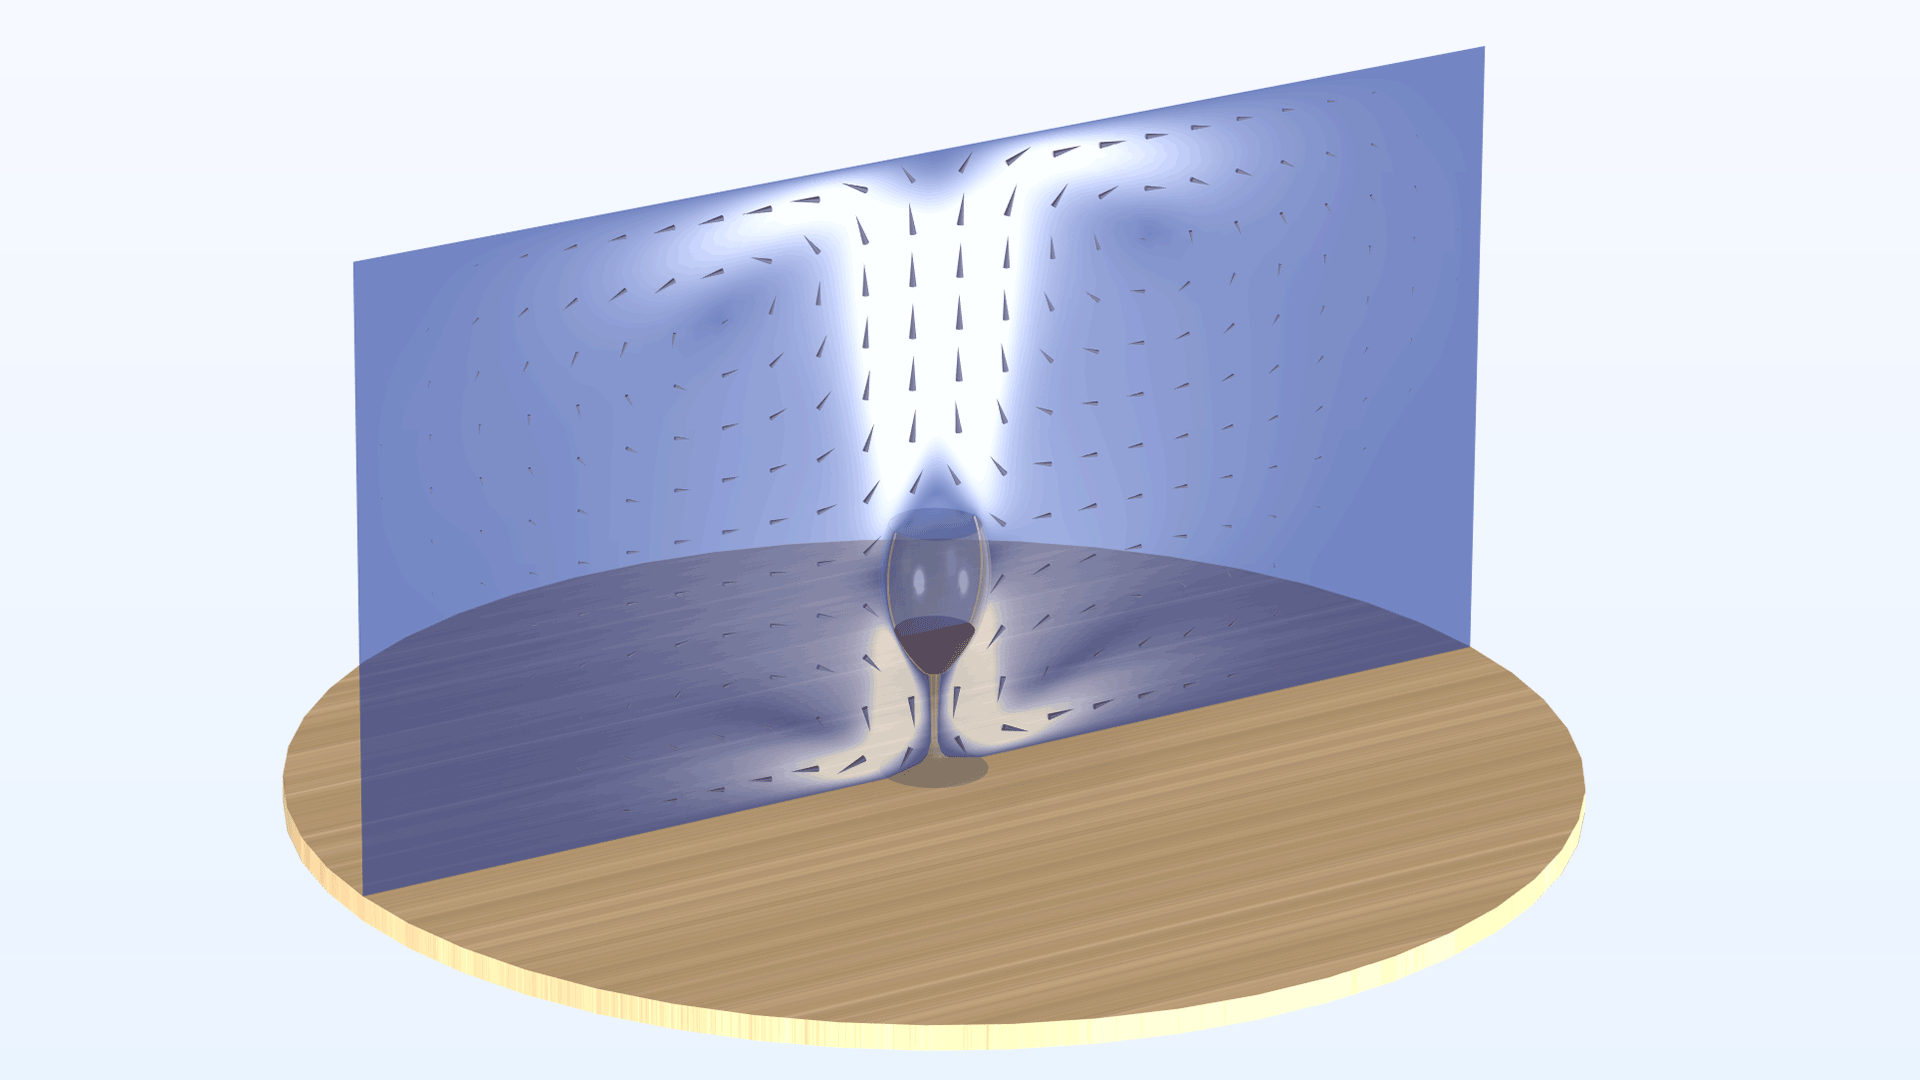 A purple velocity field around a wine glass model, with markers to indicate the evaporation.